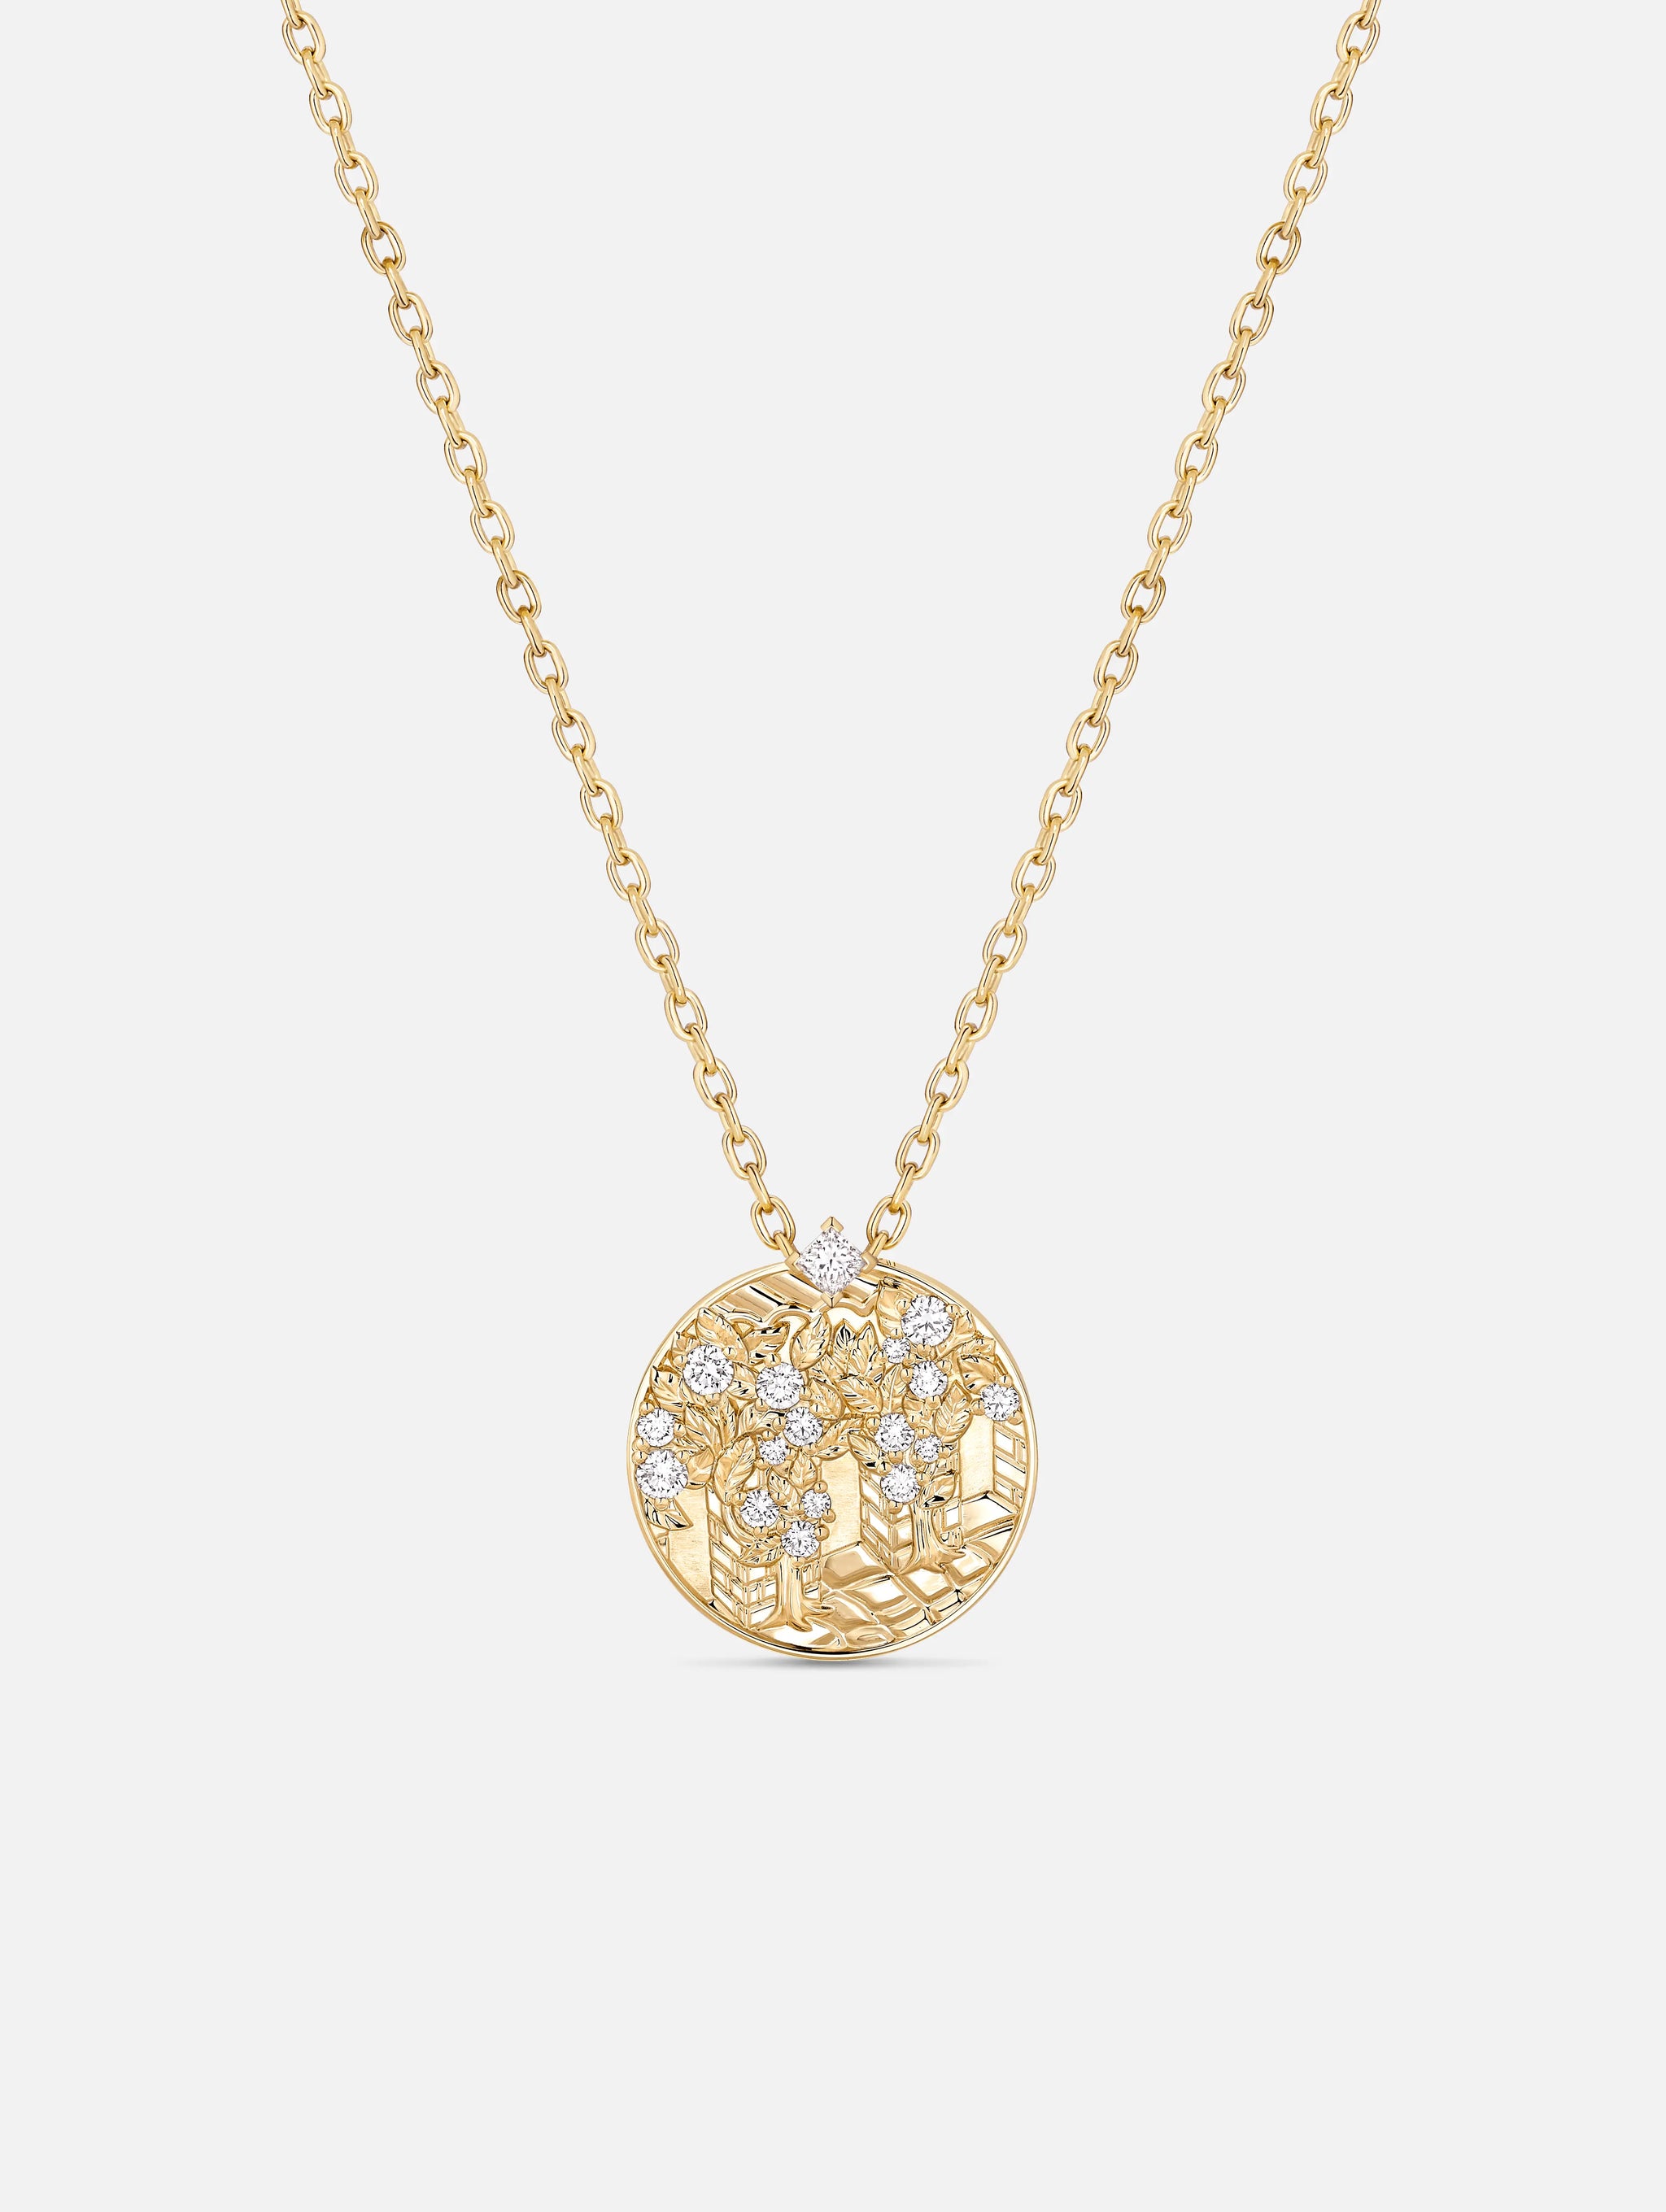 Cicada Medallion in Yellow Gold - 1 - Nouvel Heritage